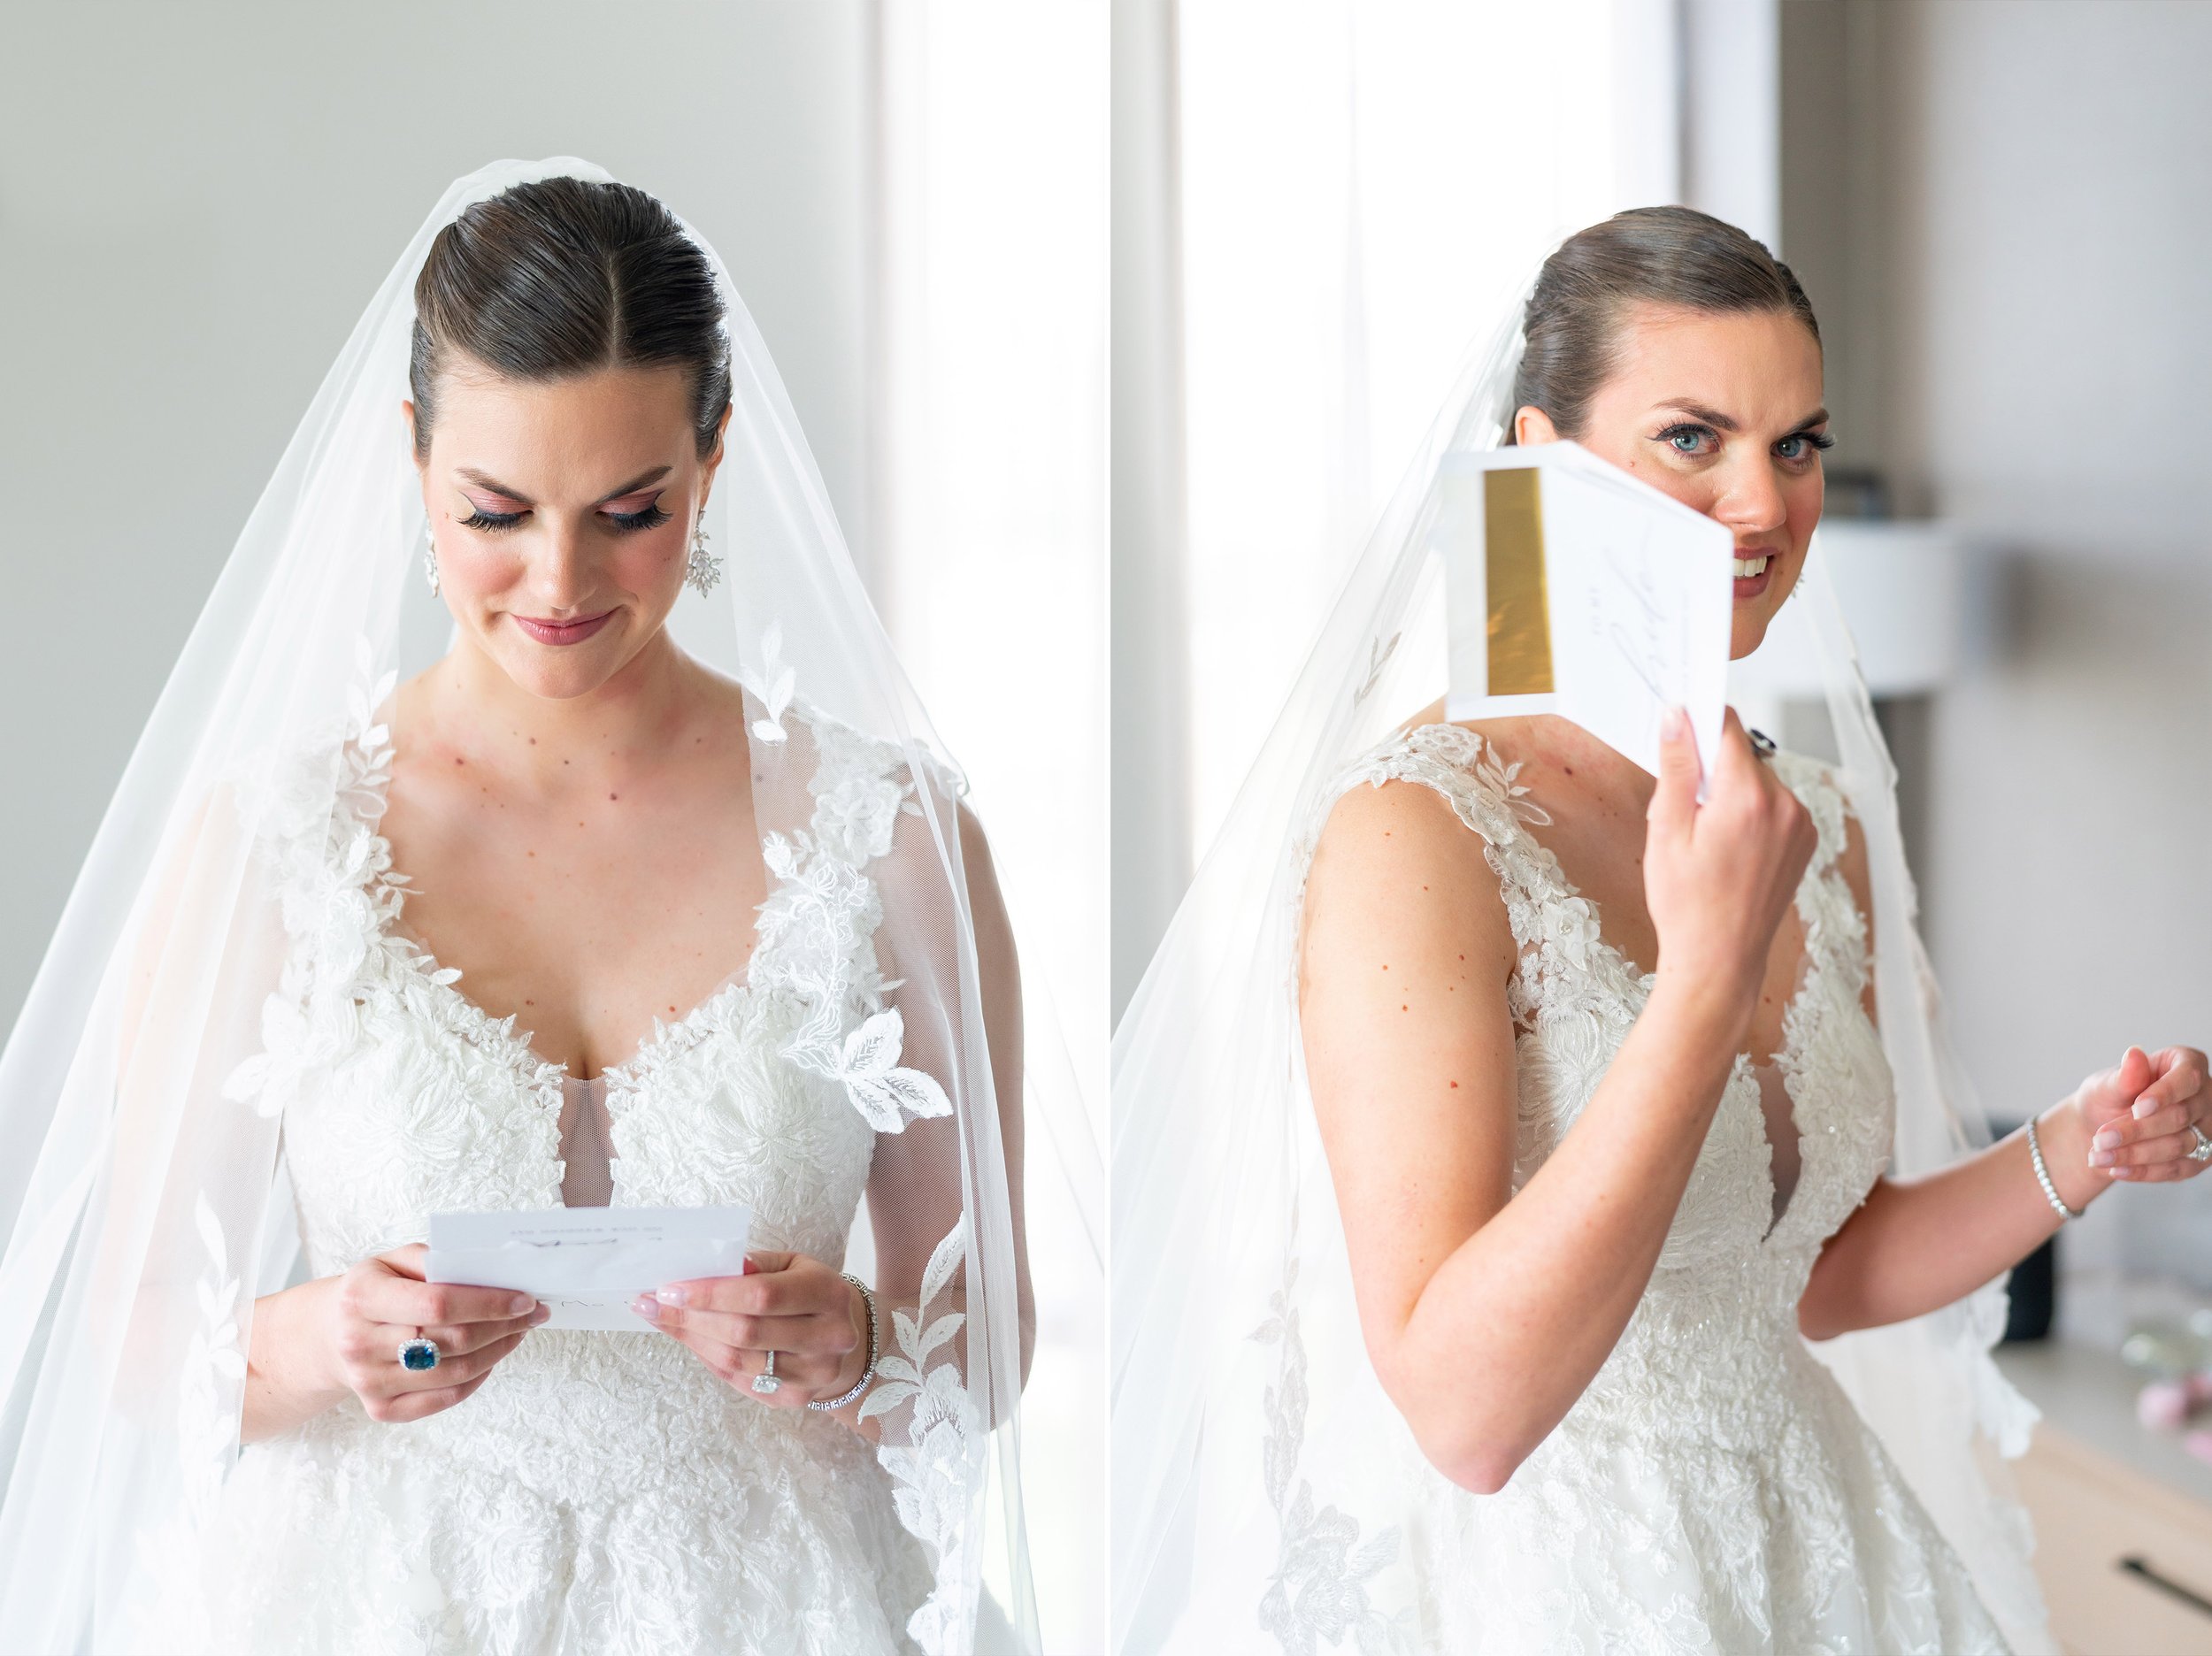 Bride crying and reading handwritten note from her groom on the wedding day